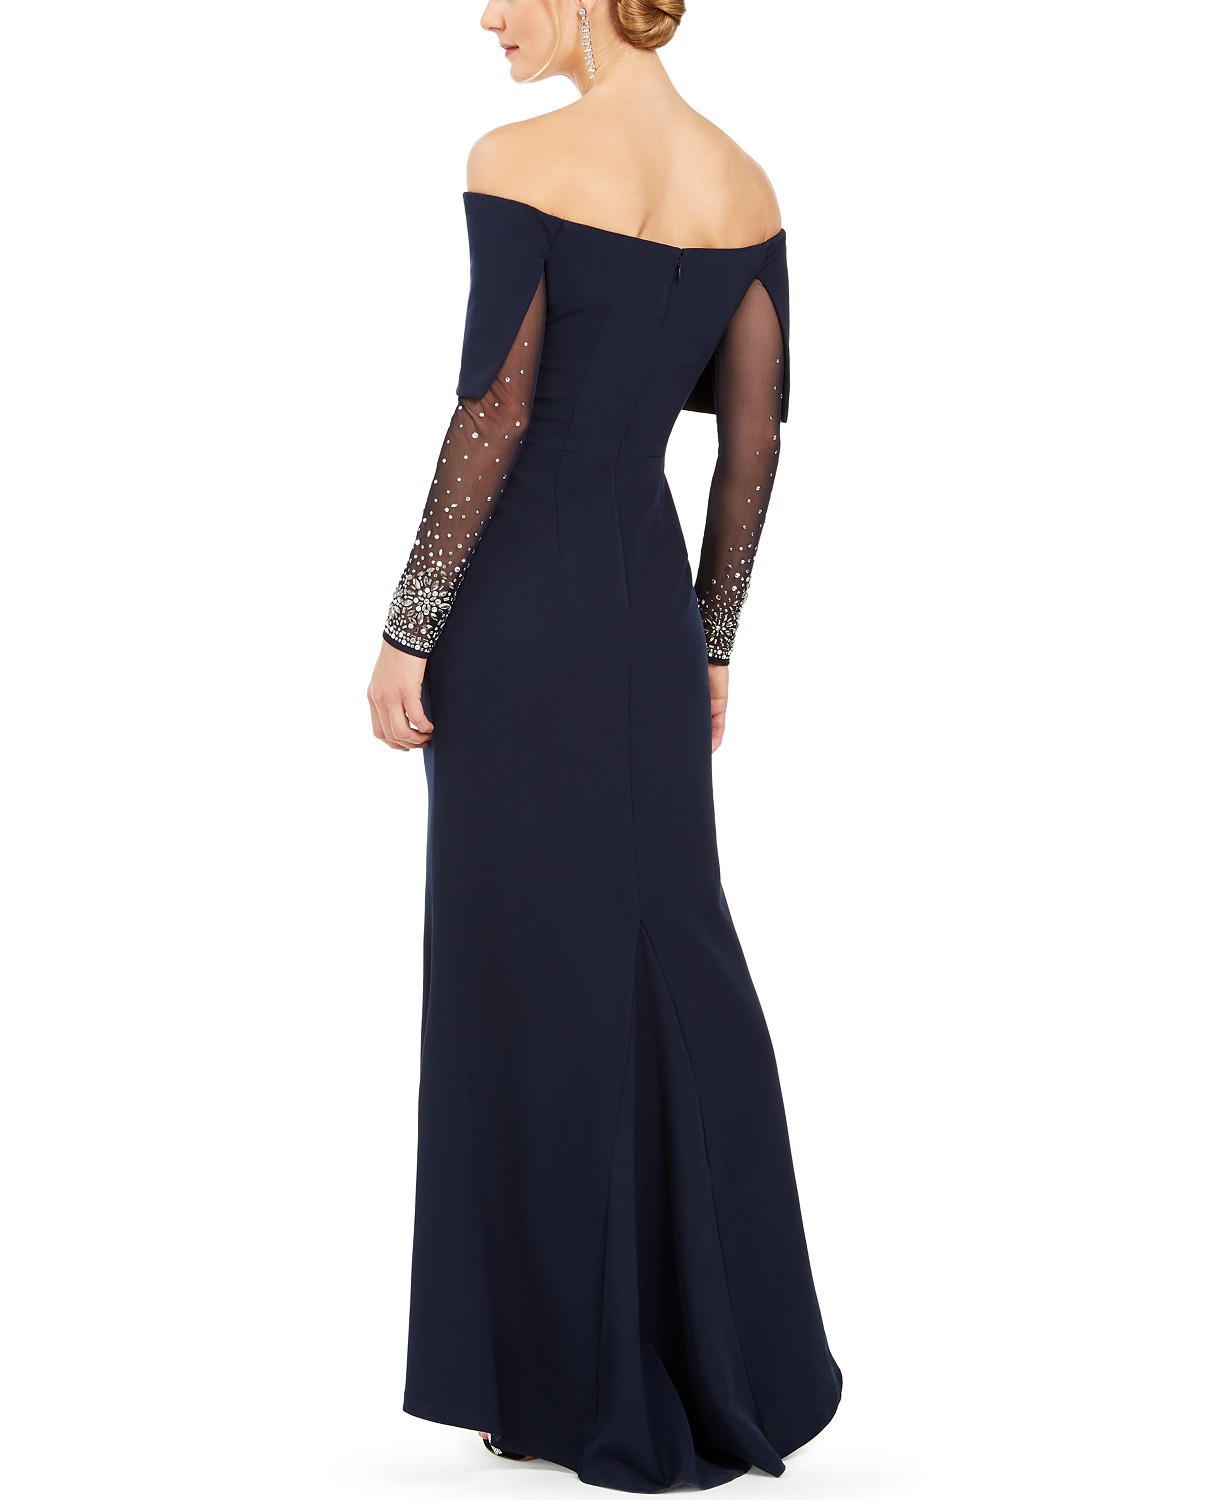 woocommerce-673321-2209615.cloudwaysapps.com-vince-camuto-womens-navy-off-the-shoulder-long-sleeve-gown-dress